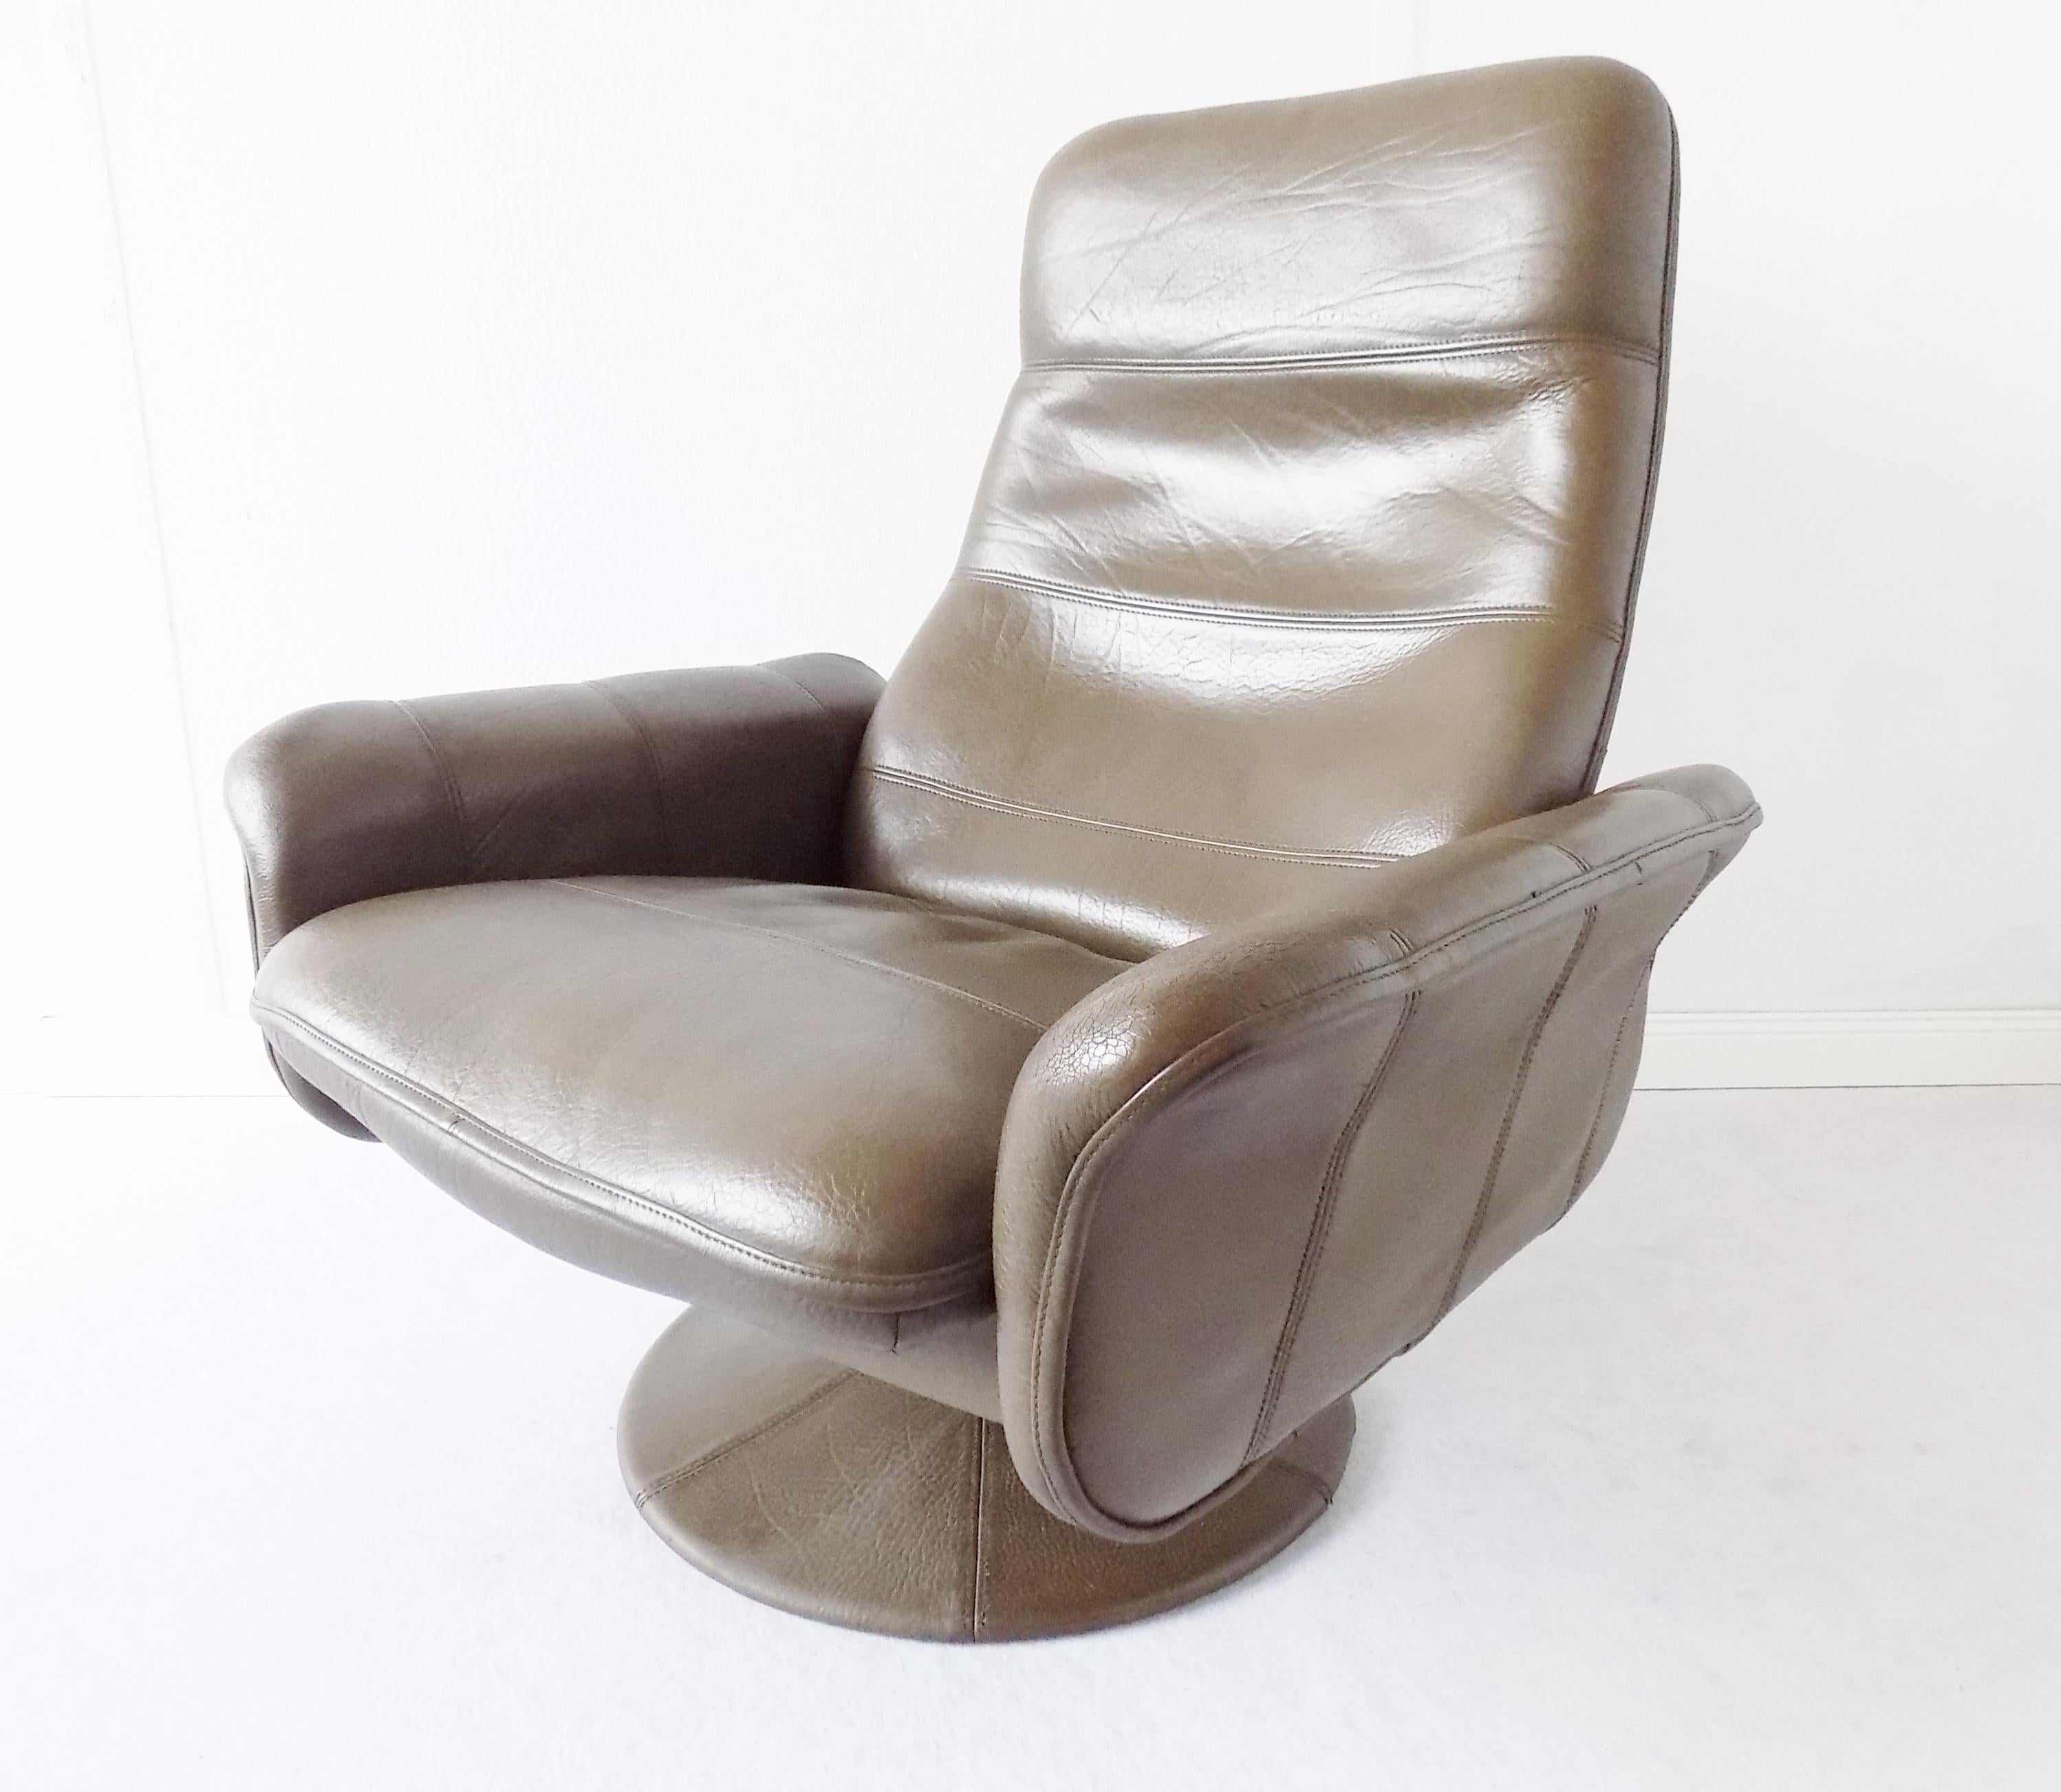 De Sede DS50 Tulip Lounge Chair with Ottoman, mid-century modern, Swiss, leather 1